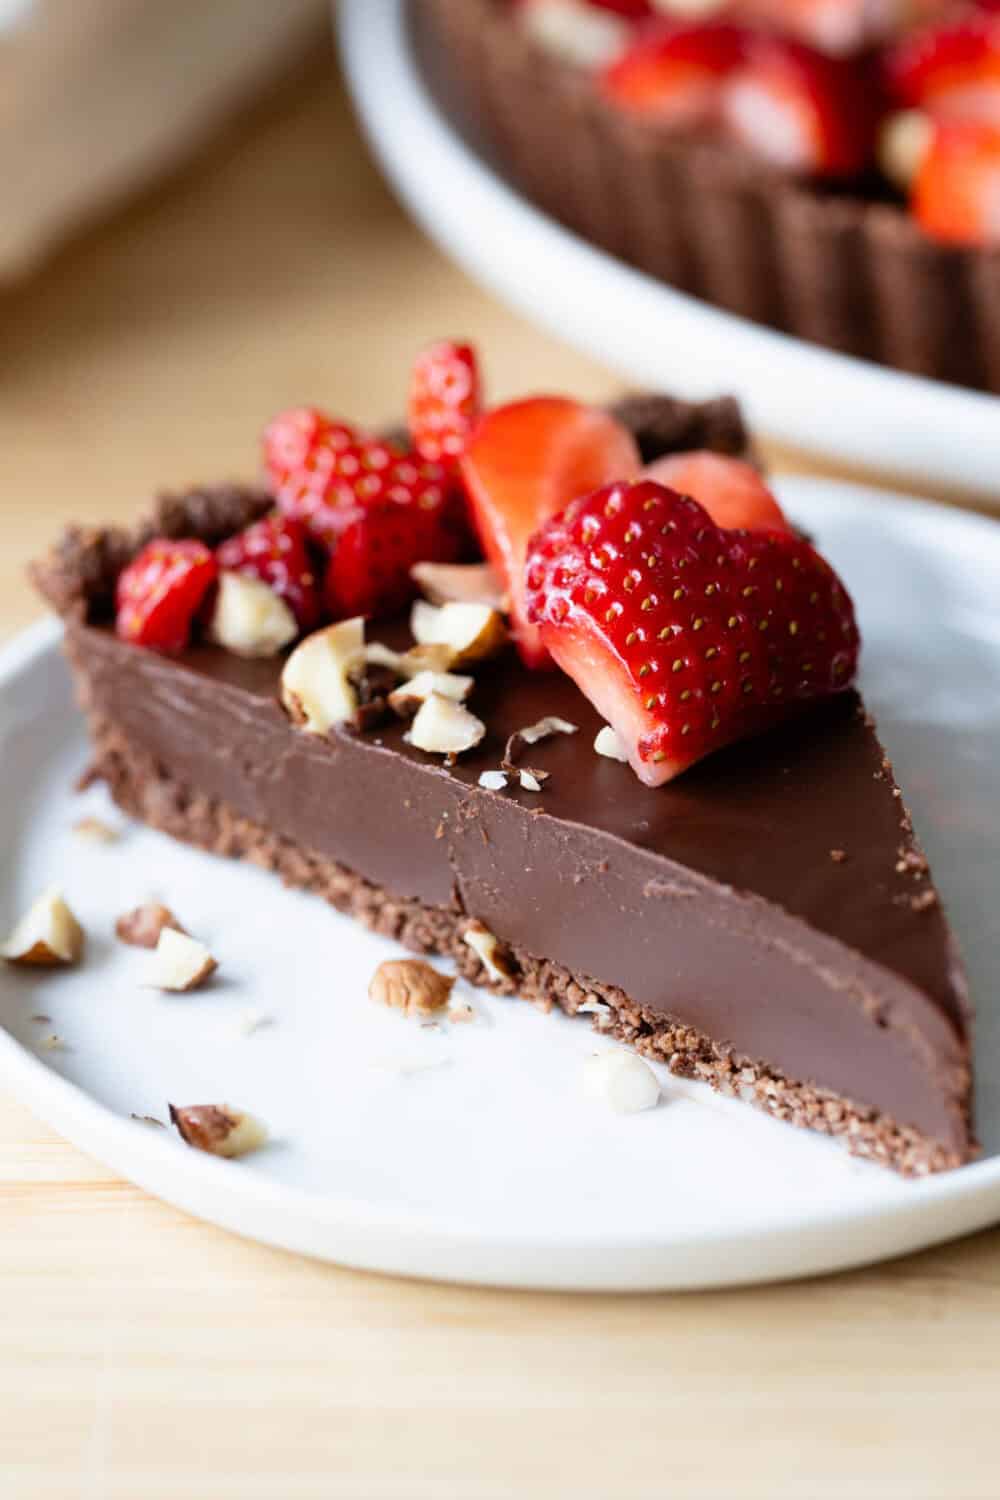 One slice of chocolate tart on a plate to show texture of filling and crust.